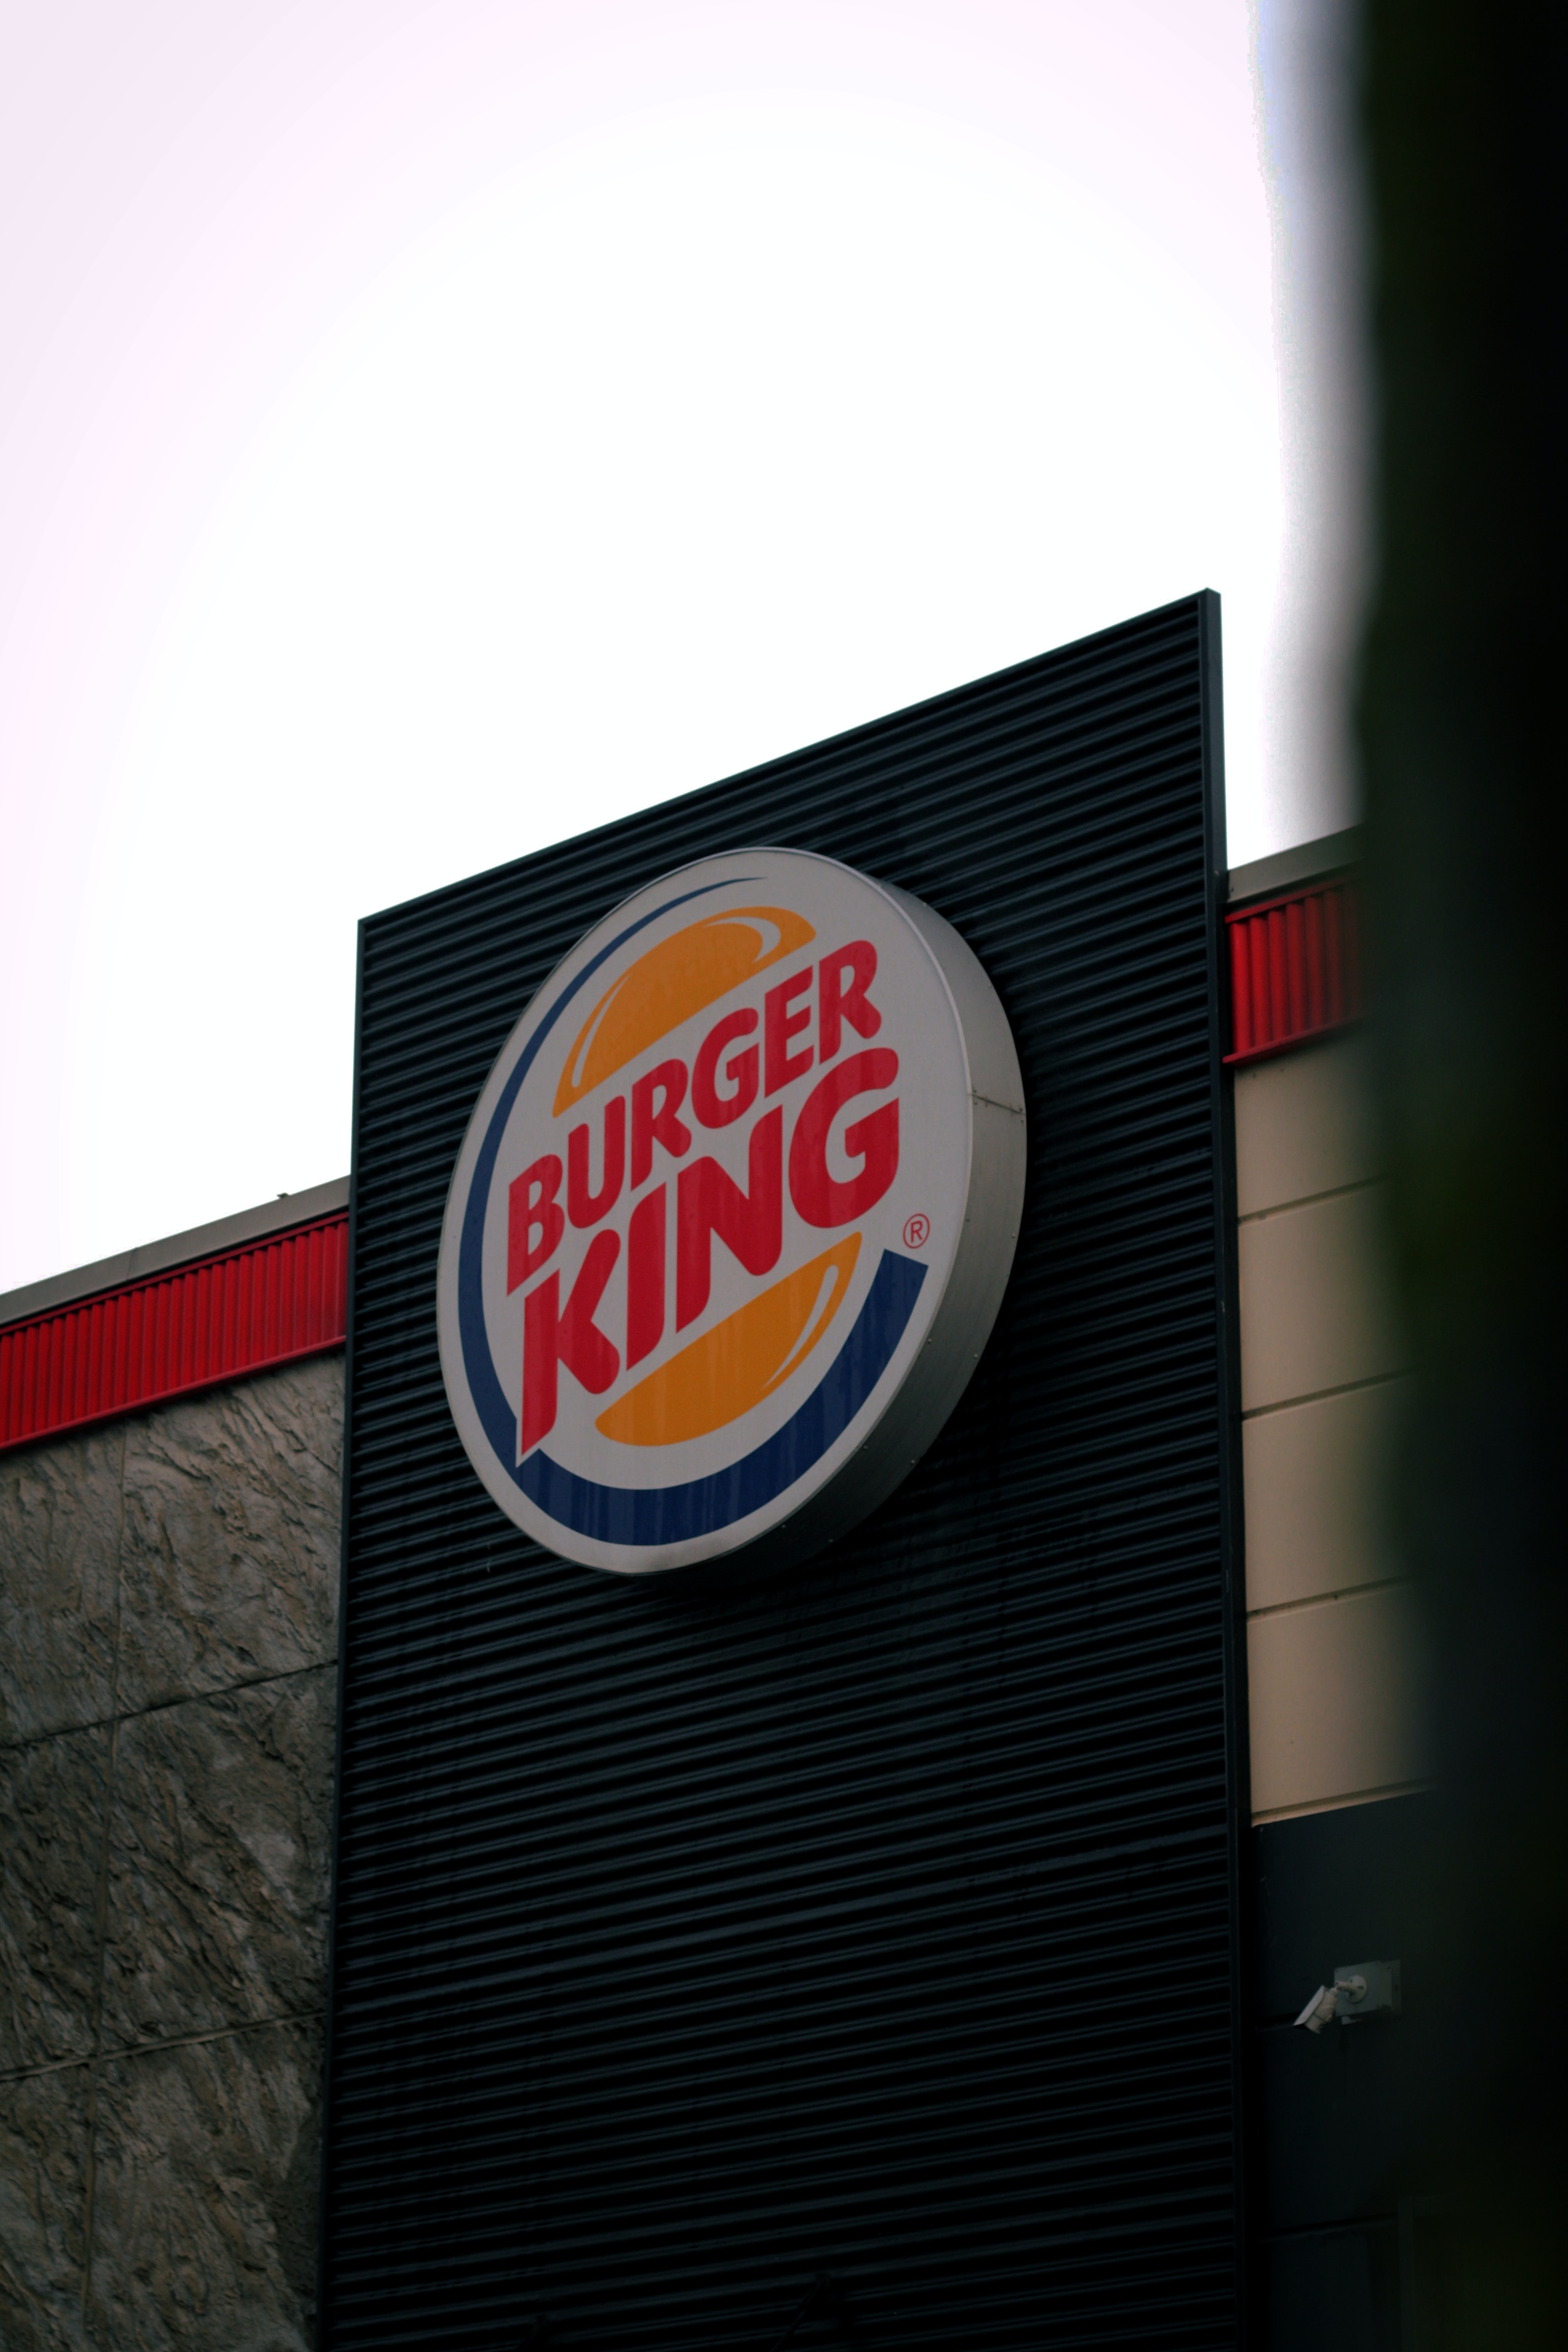 Burger King Stock: Is it worth investing in?